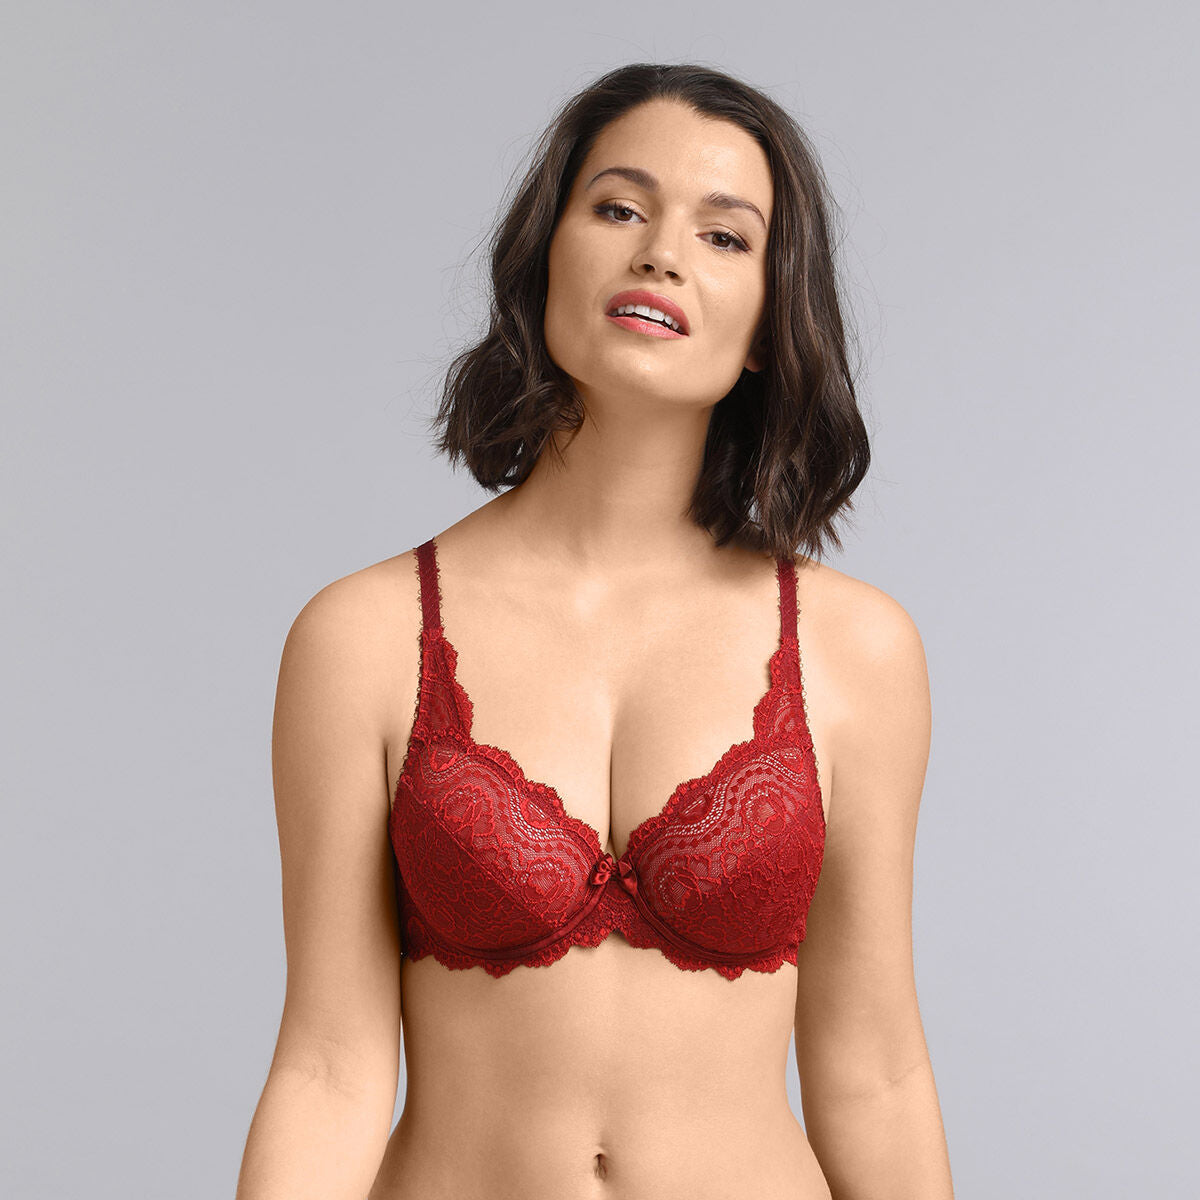 TAUSHI DOUBLE CLOTH- Priksha-Net Bra-Baby Pink Women Everyday Non Padded Bra  - Buy TAUSHI DOUBLE CLOTH- Priksha-Net Bra-Baby Pink Women Everyday Non  Padded Bra Online at Best Prices in India